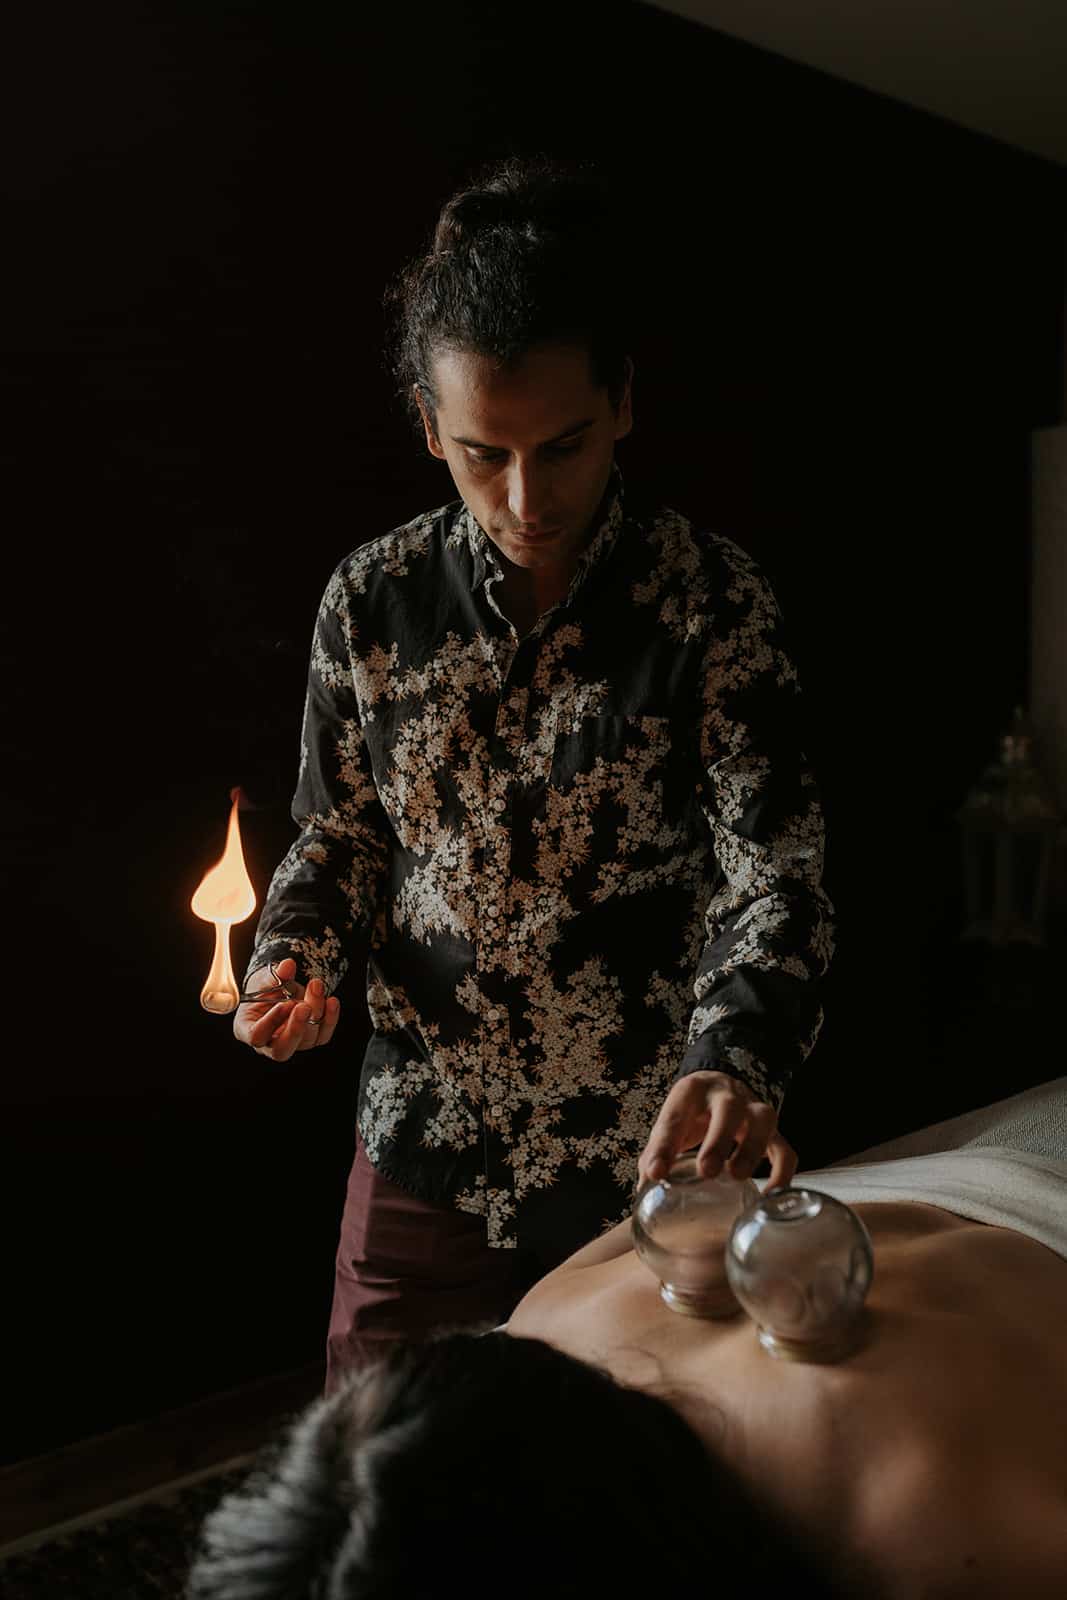 Practitioner lighting a cup for fire cupping therapy in acupuncture